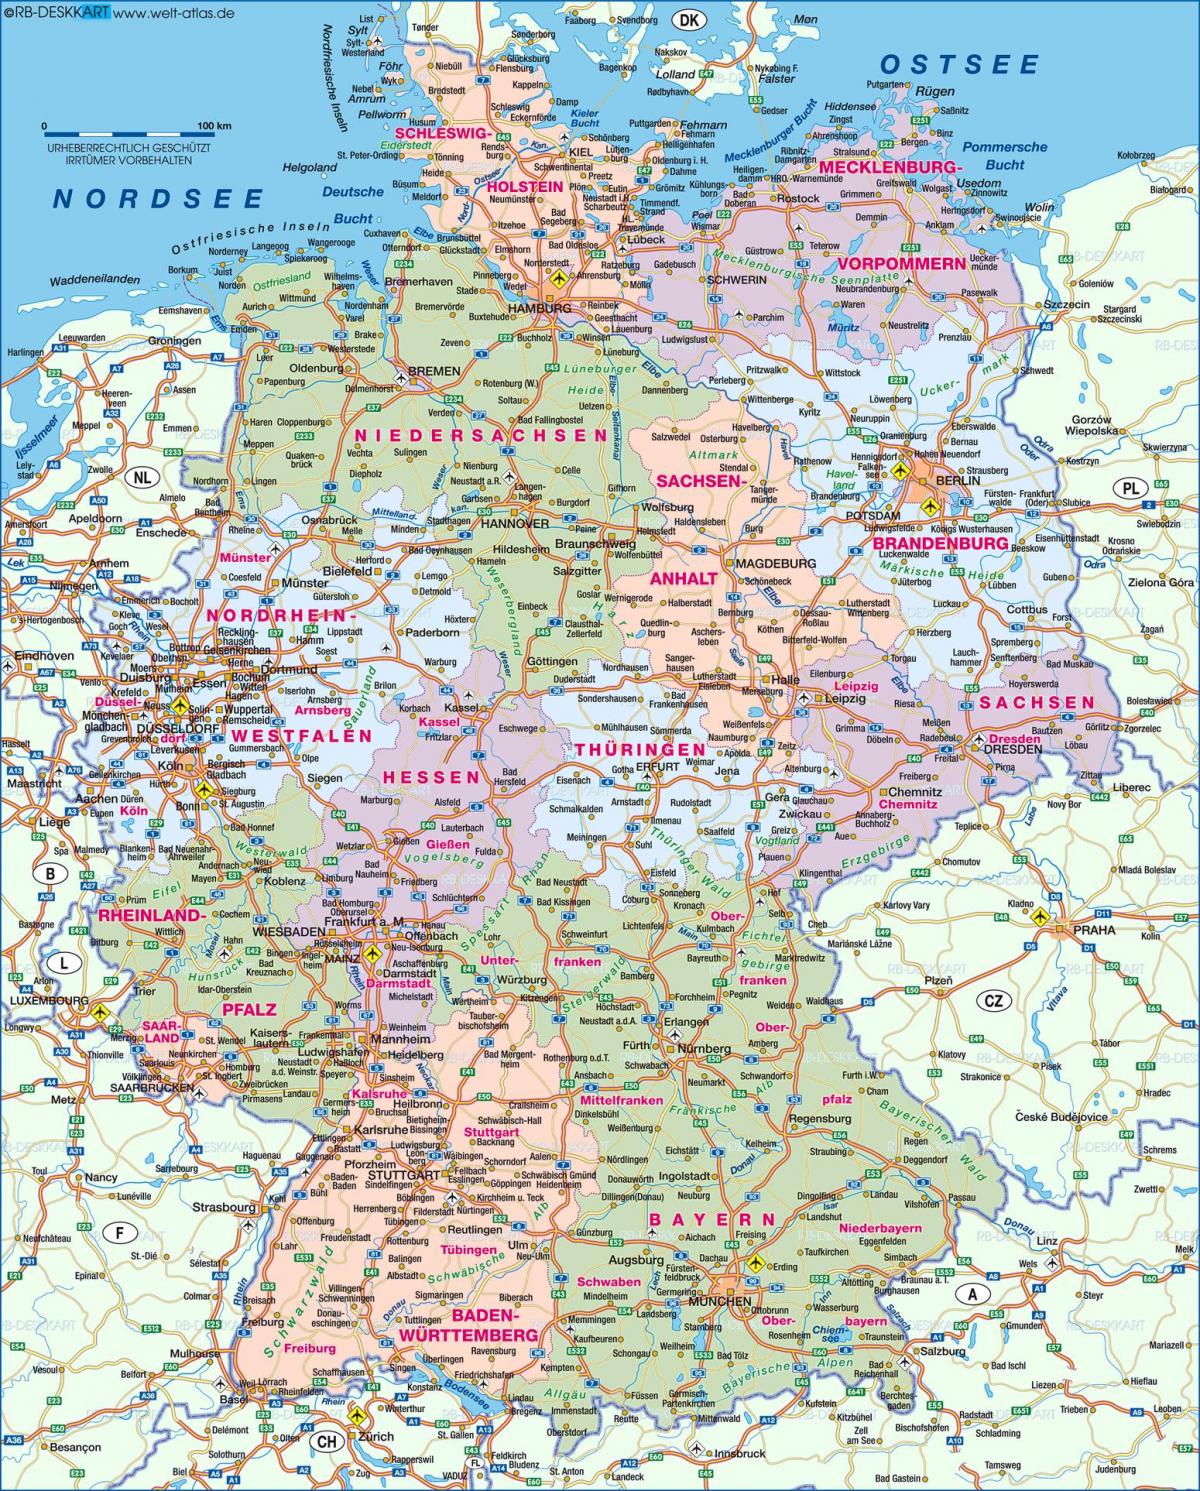 show me a map of Germany